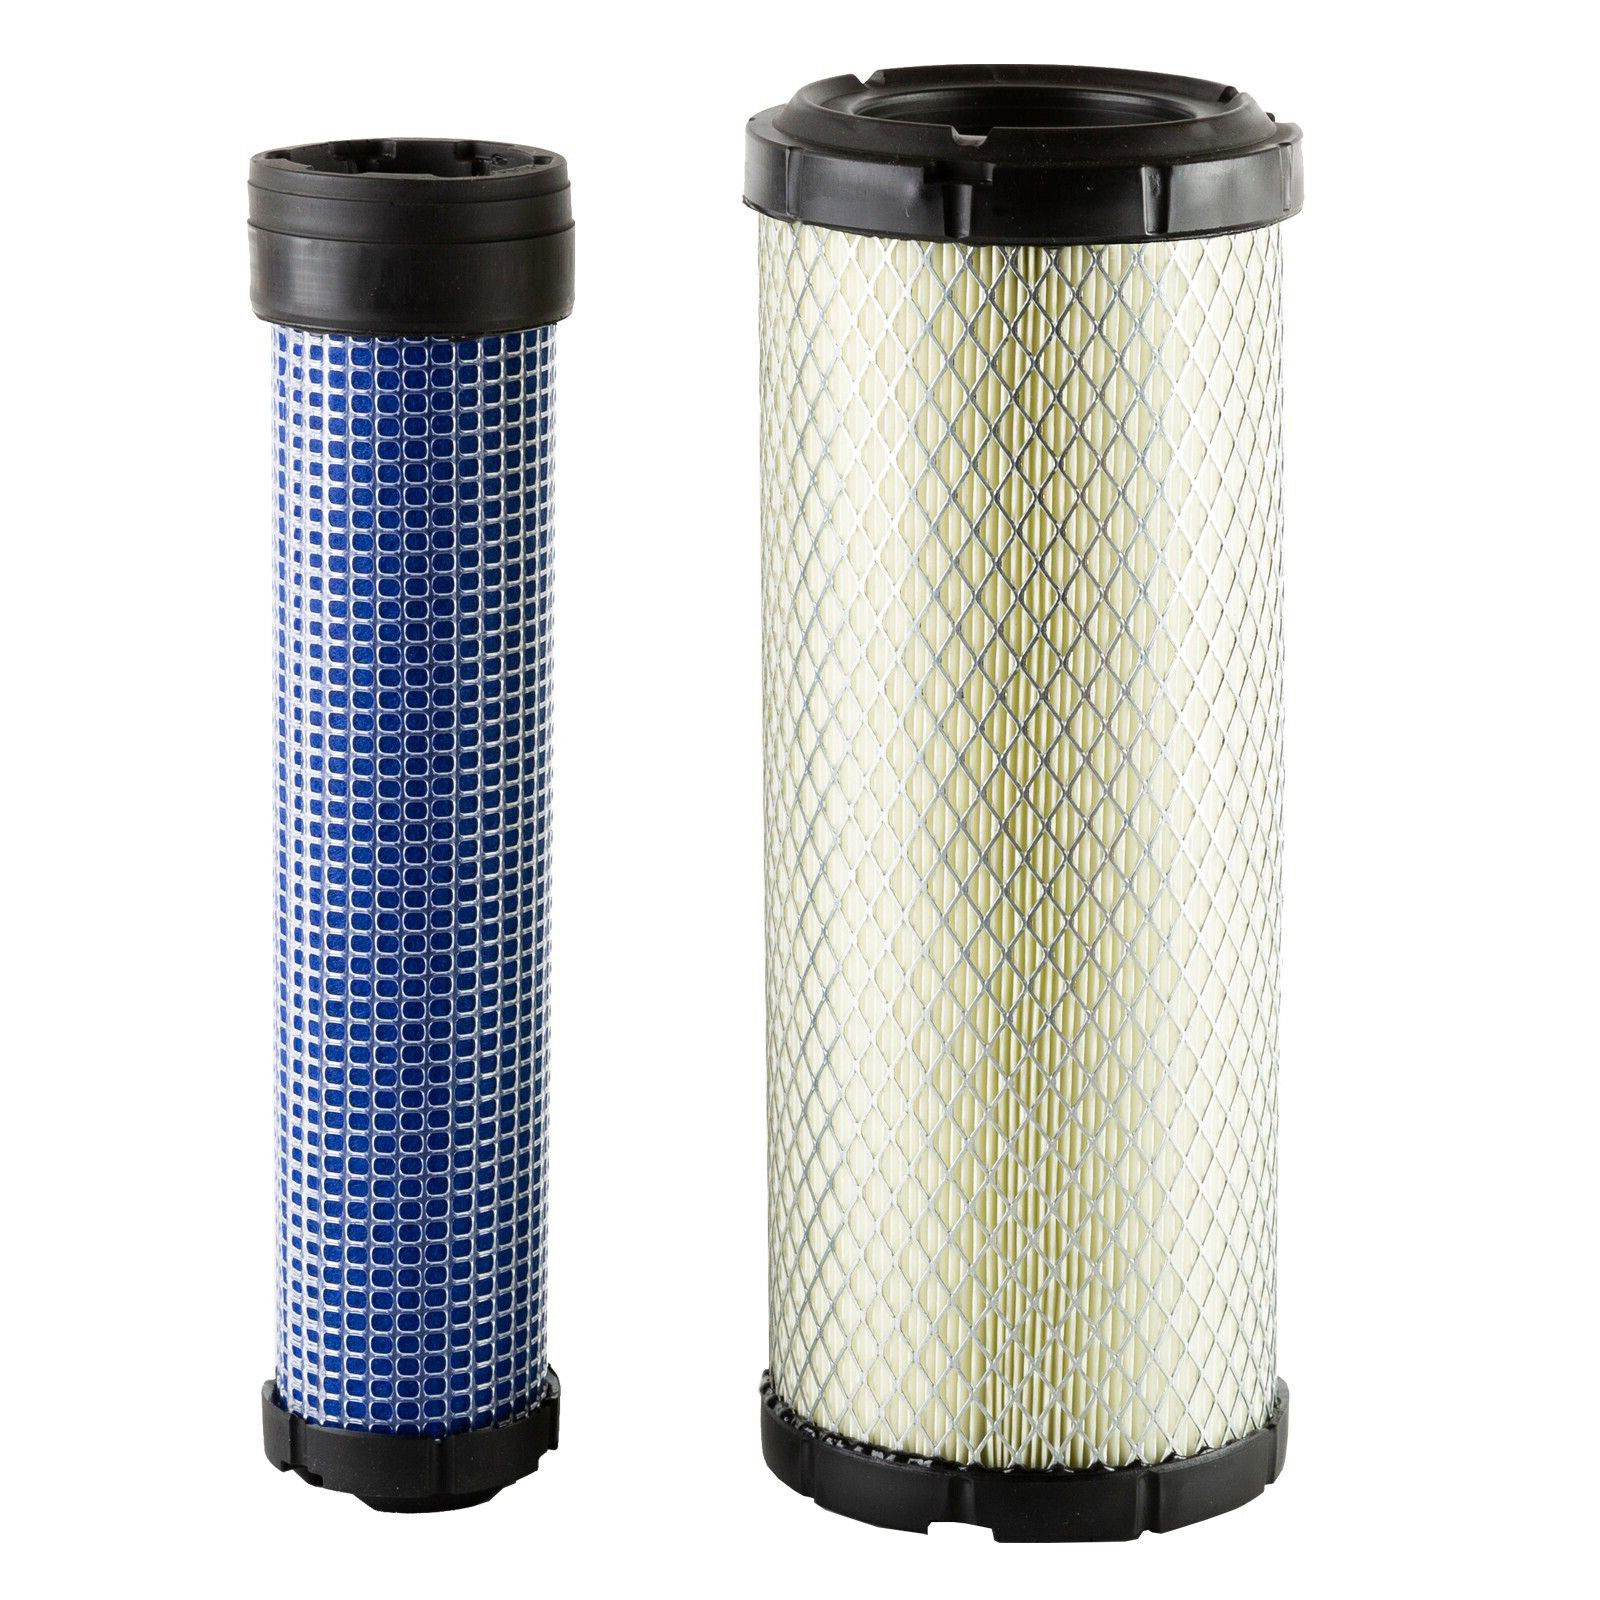 AIR FILTER P821575 & P822858 AIR FILTER SET FOR DONALDSON FPG05 AIR CLEANERS